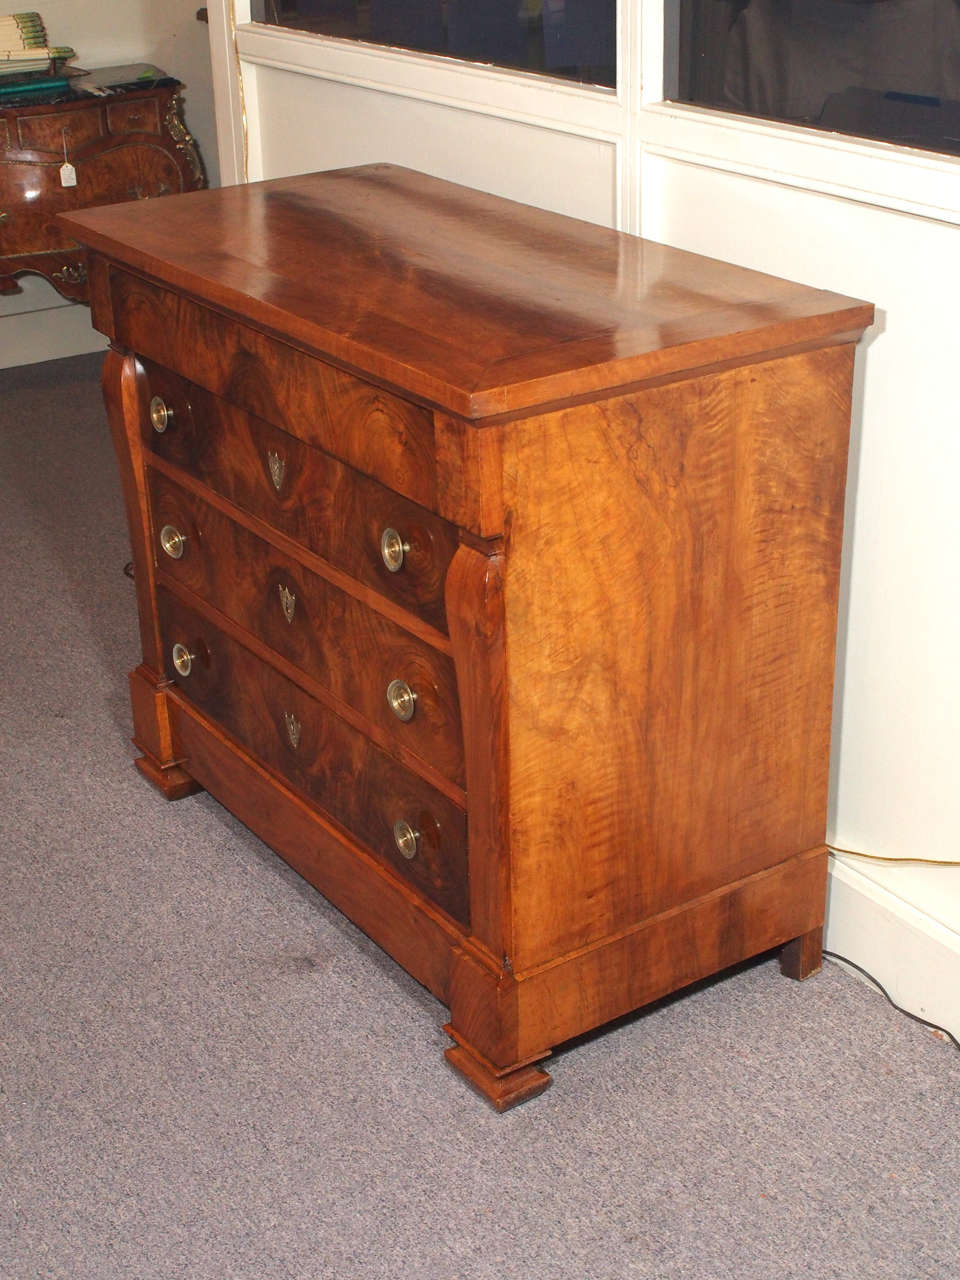 Early 19th Century French Walnut Commode In Excellent Condition For Sale In New Orleans, LA